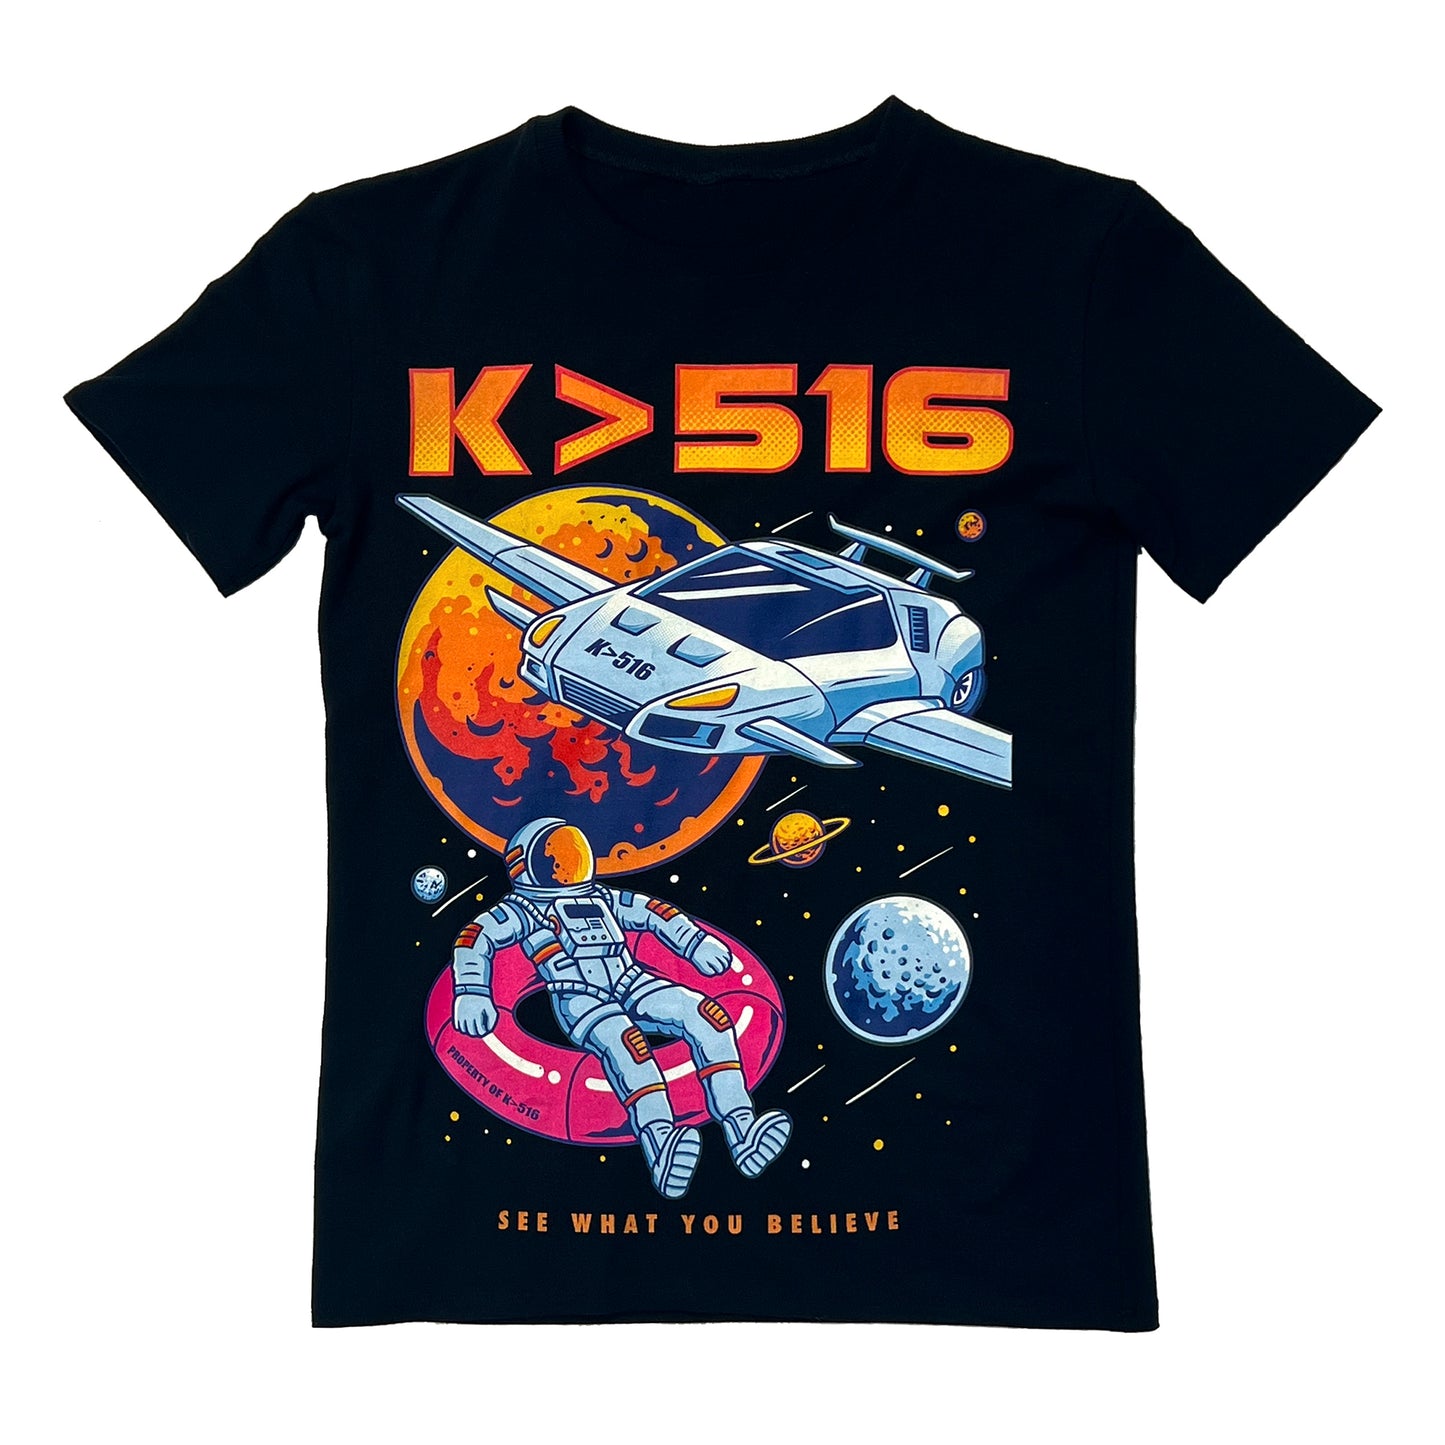 A black, soft, premium t shirt with a large multicolored graphic. Which shows an astronaut in space sitting on a pink floaty while a white car flies above them with planets and multiple stars in the background. Along with the phrase "See What You Believe" at the bottom and the brand name K>516 at the top.